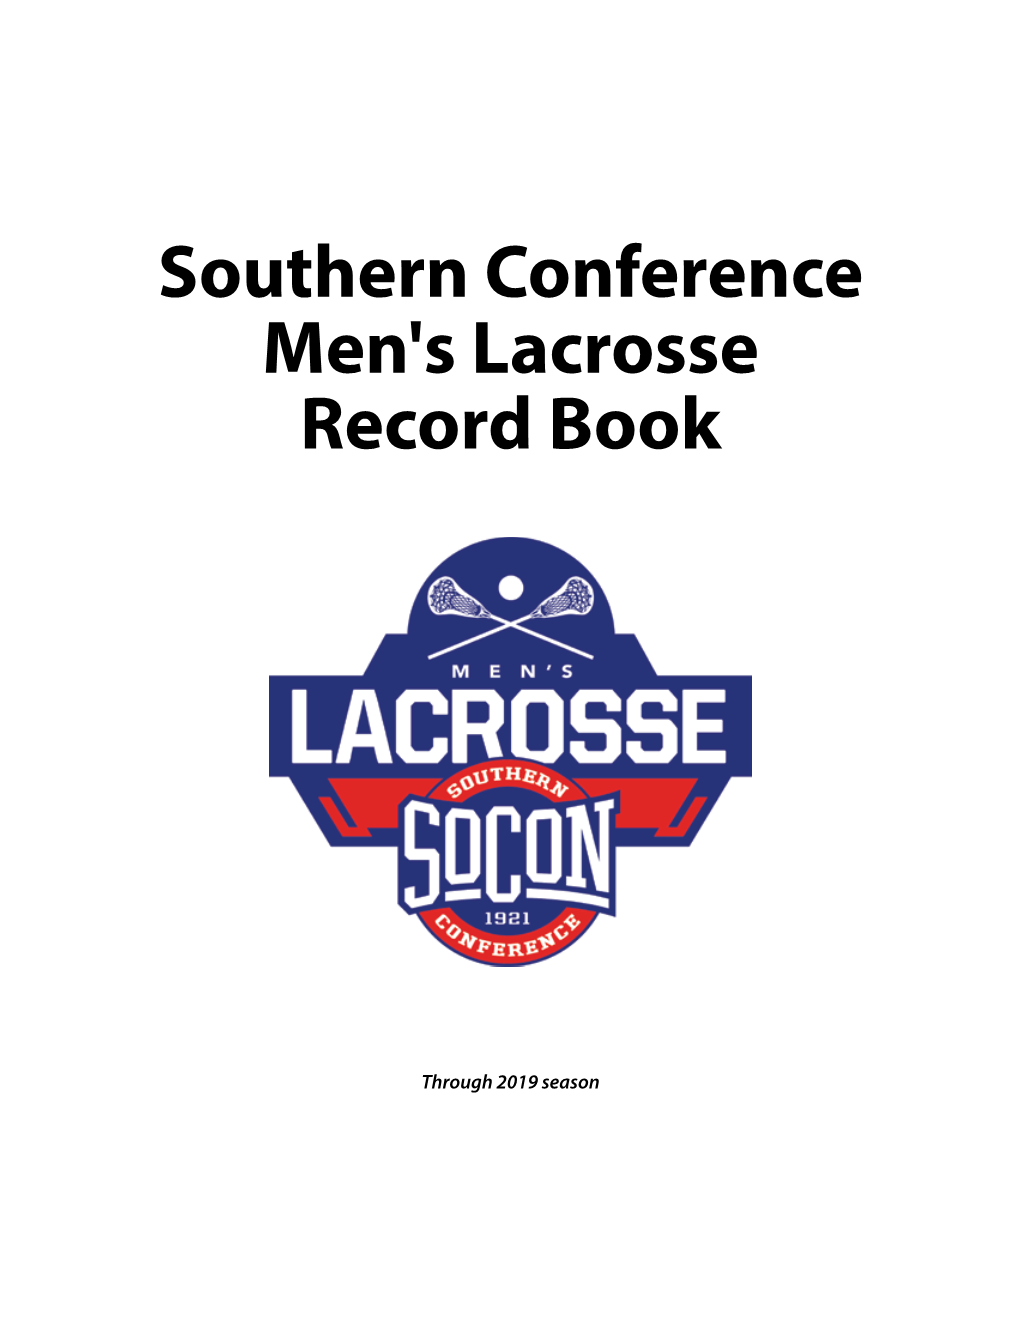 Southern Conference Men's Lacrosse Record Book